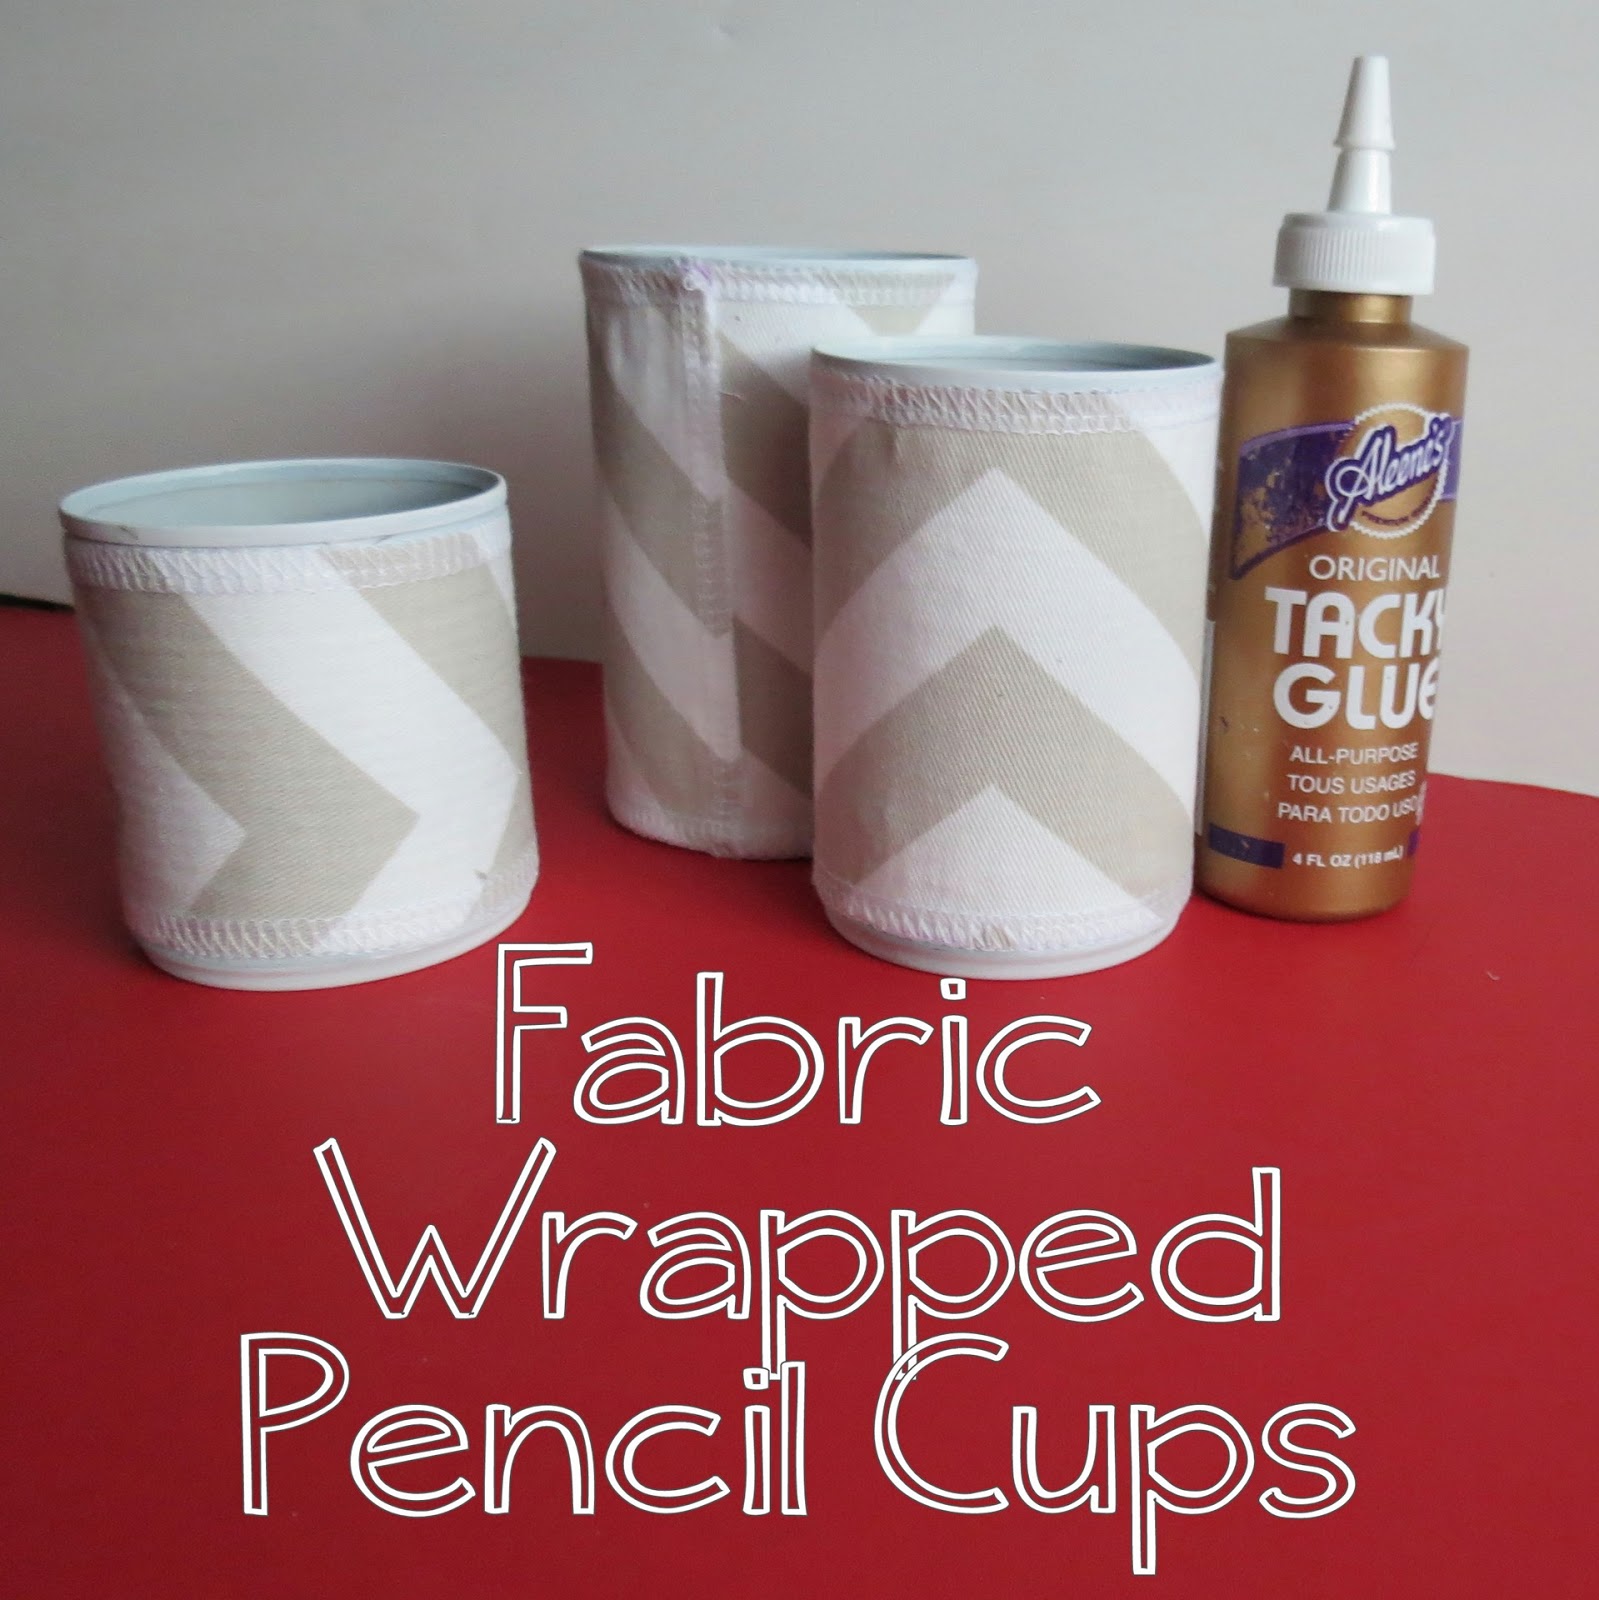 [Fabric-Wrapped-Pencil-Cups%2520%25284%2529%255B3%255D.jpg]